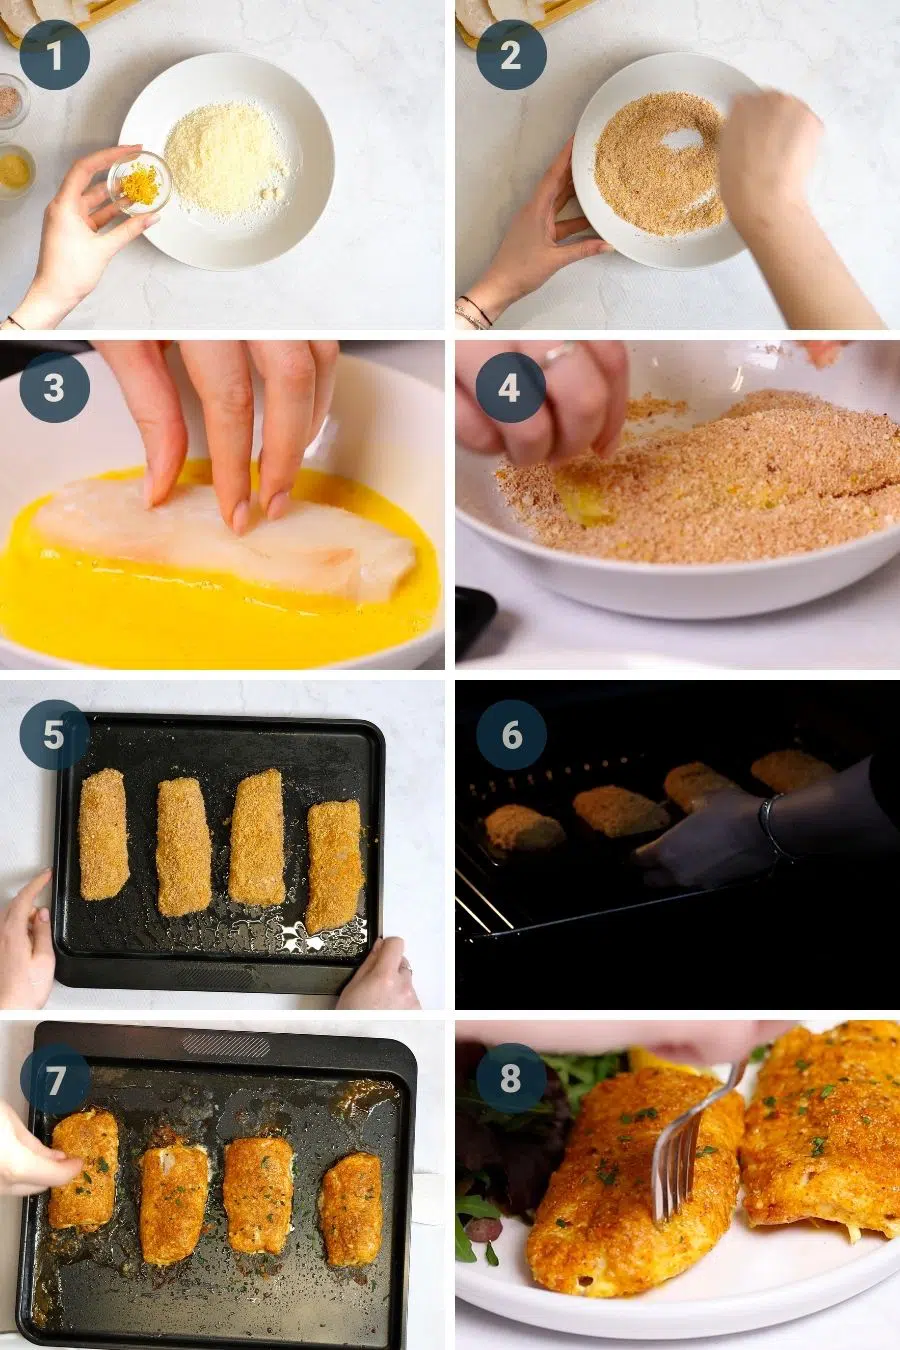 how to make parmesan crusted cod steps by steps intructions